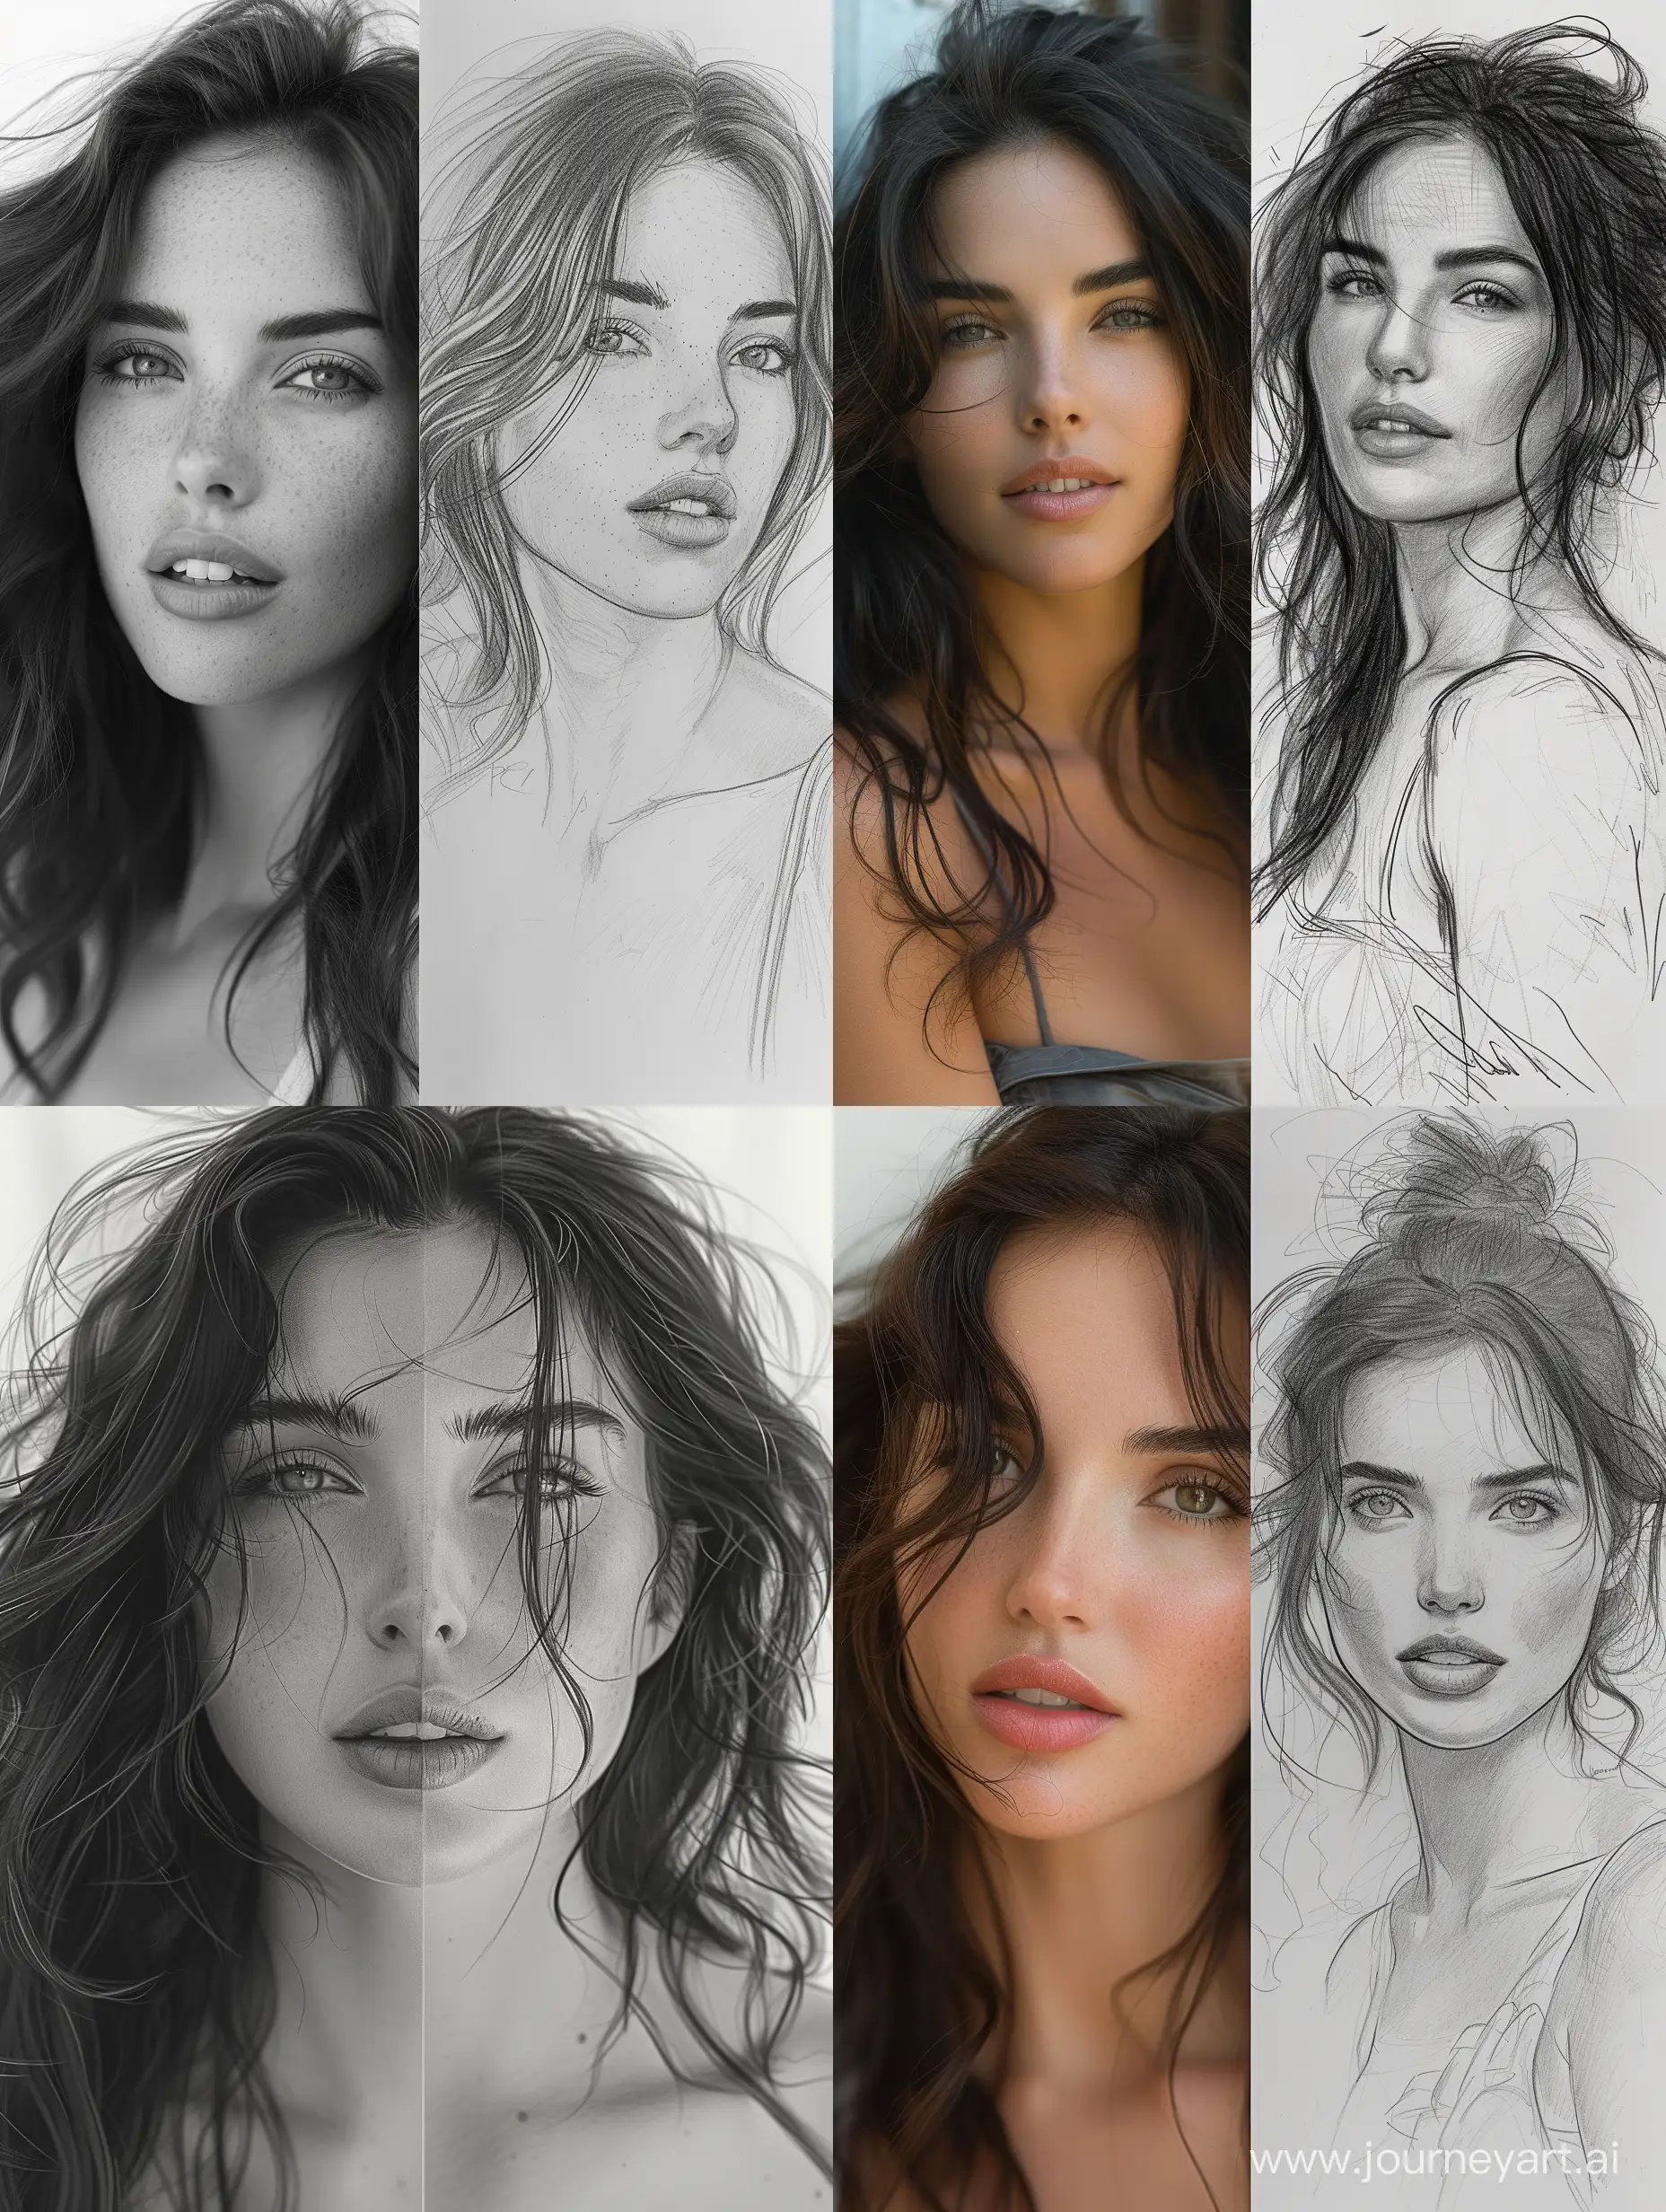 /imagine [A split image with a realistic portrait photo of a beautiful woman with thick hair and a morning fresh look on one side and a pencil sketch drawing of the same image on the other side.] --s 750